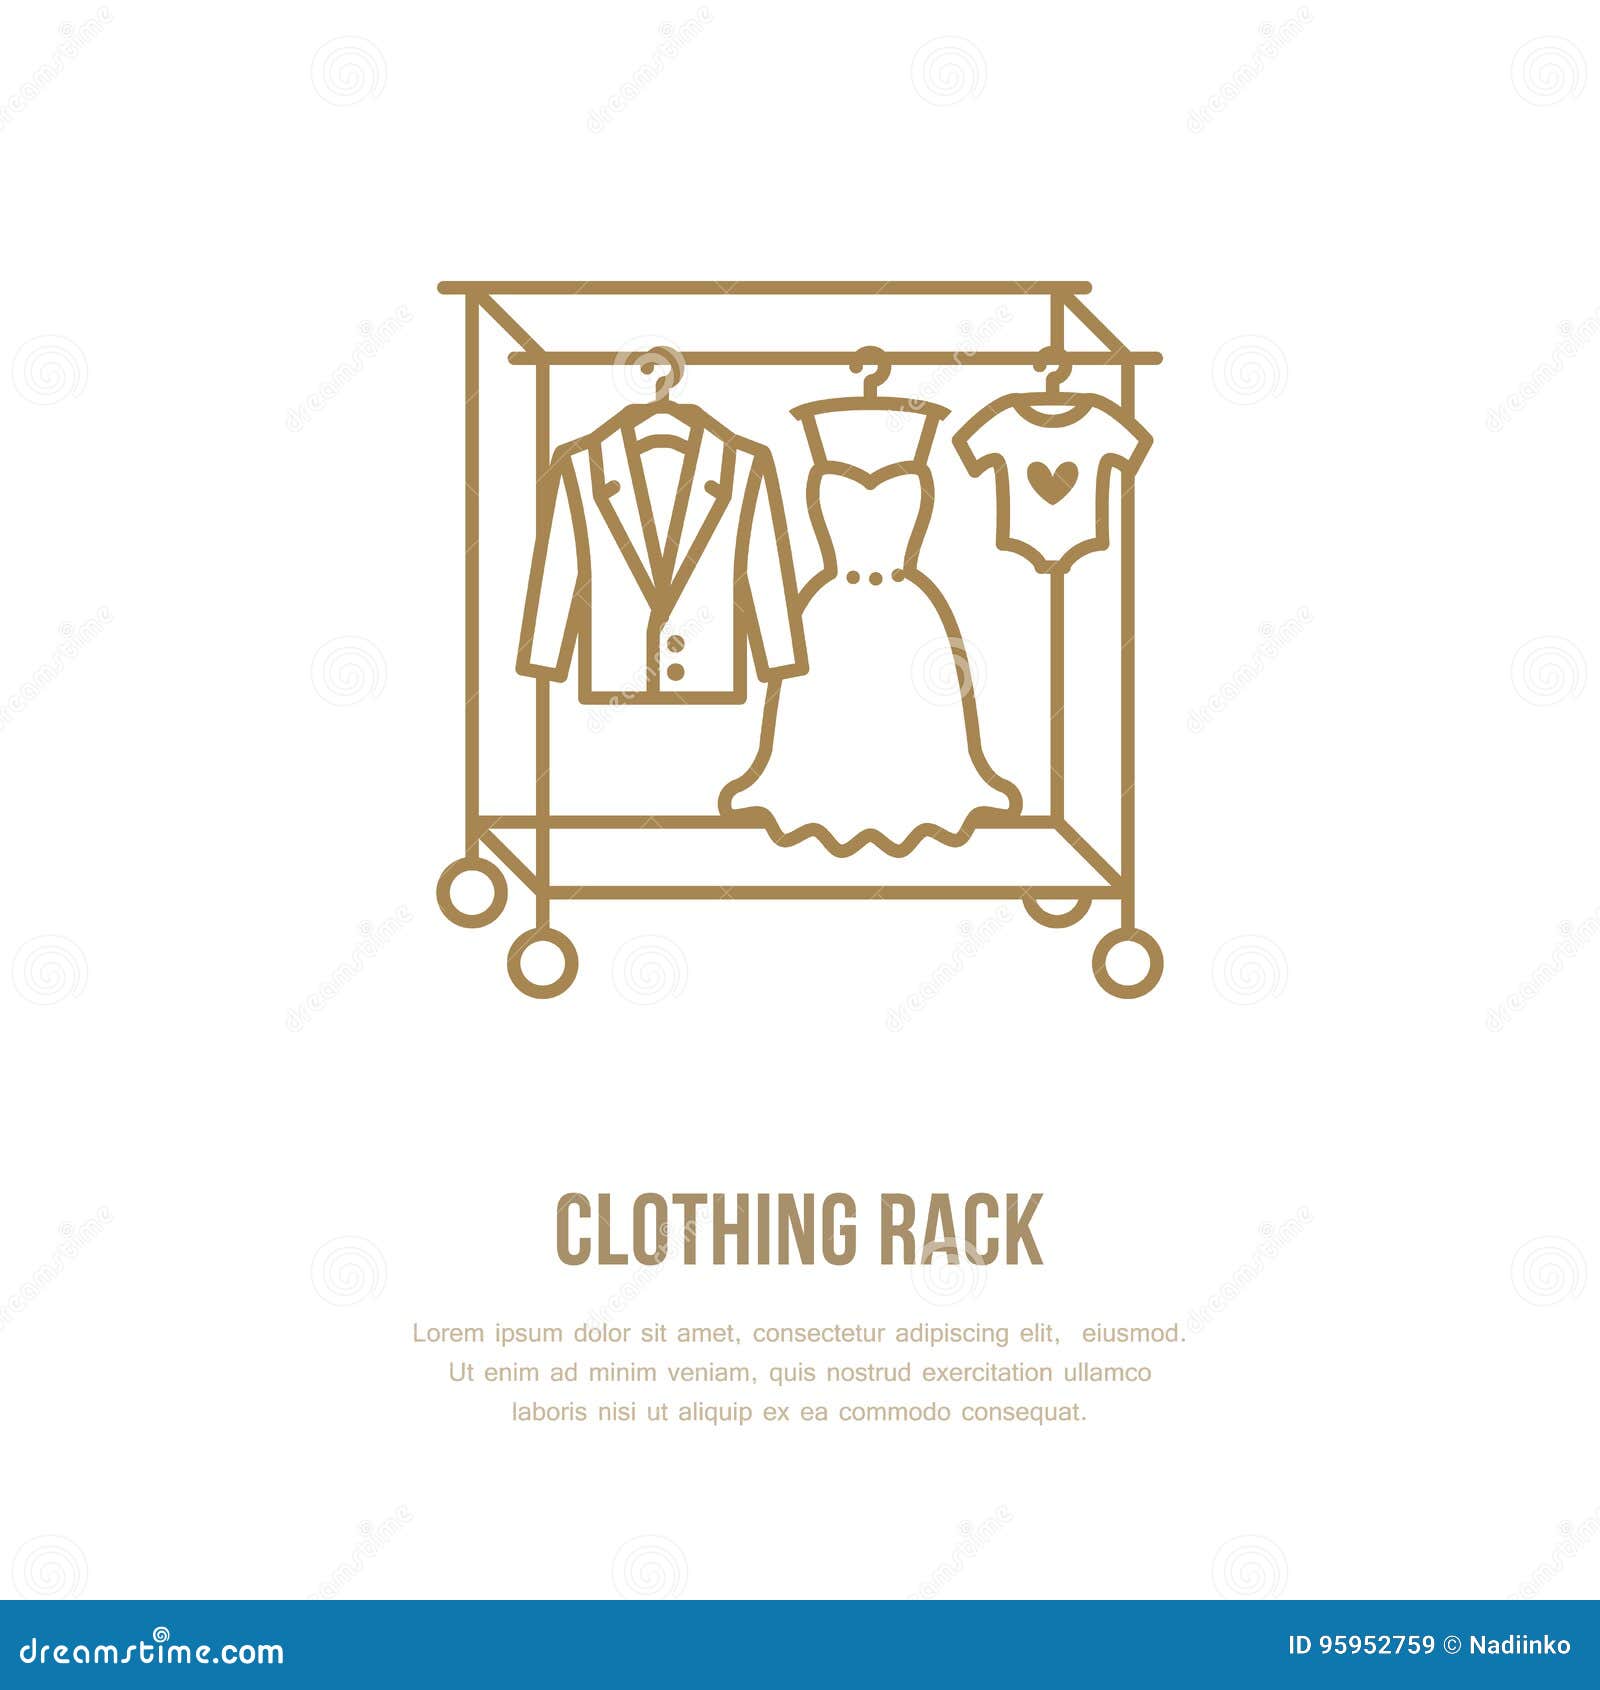 wedding dress, men suit, kids clothes on hanger icon, clothing rack line logo. flat sign for apparel collection